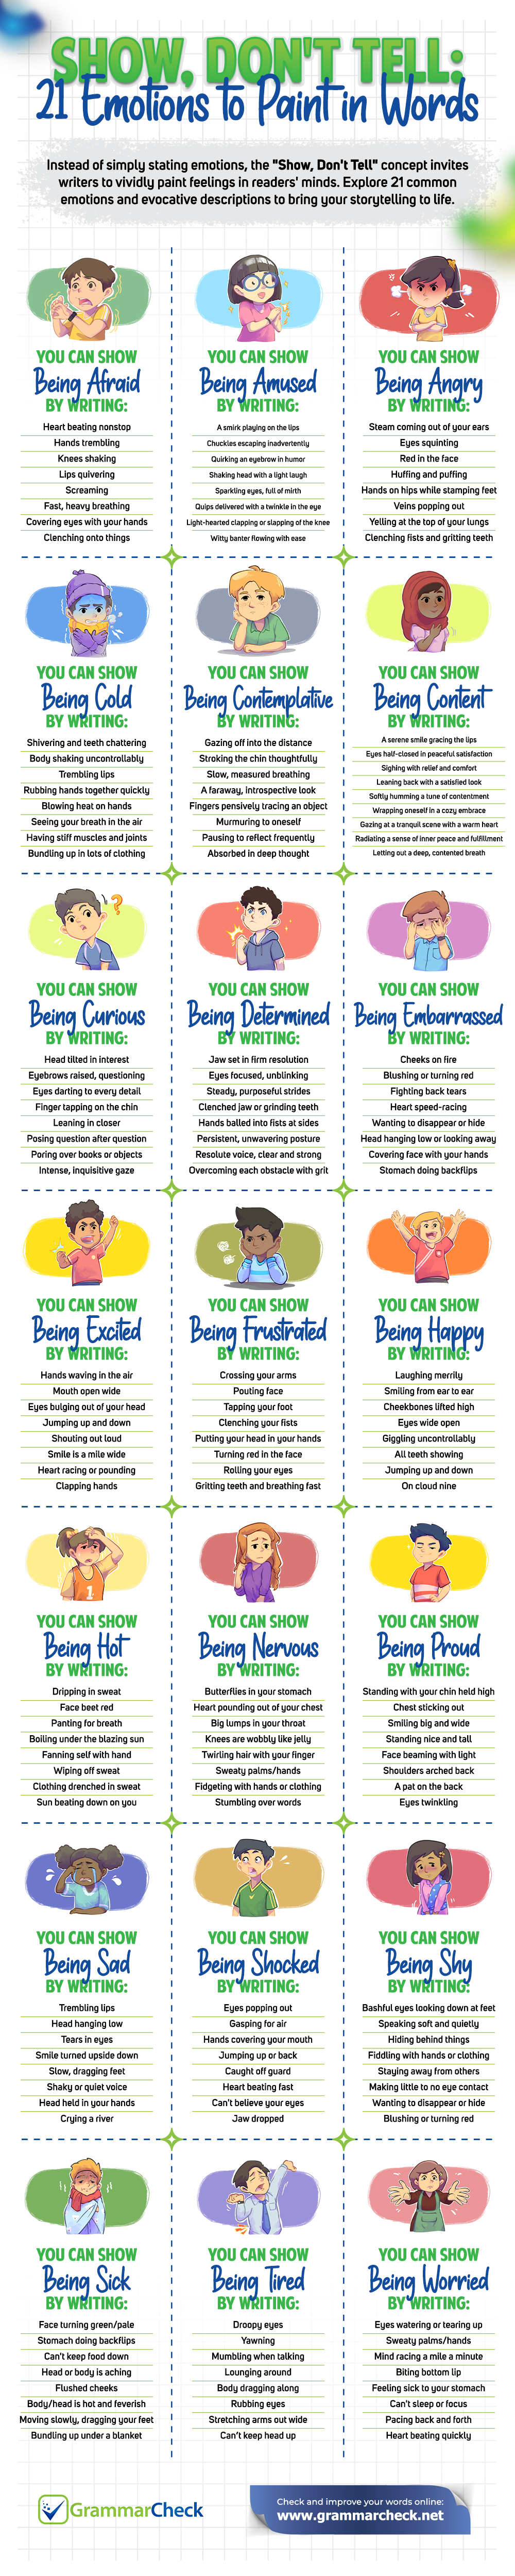 Show Don't Tell: 21 Emotions to Paint in Words (Infographic)